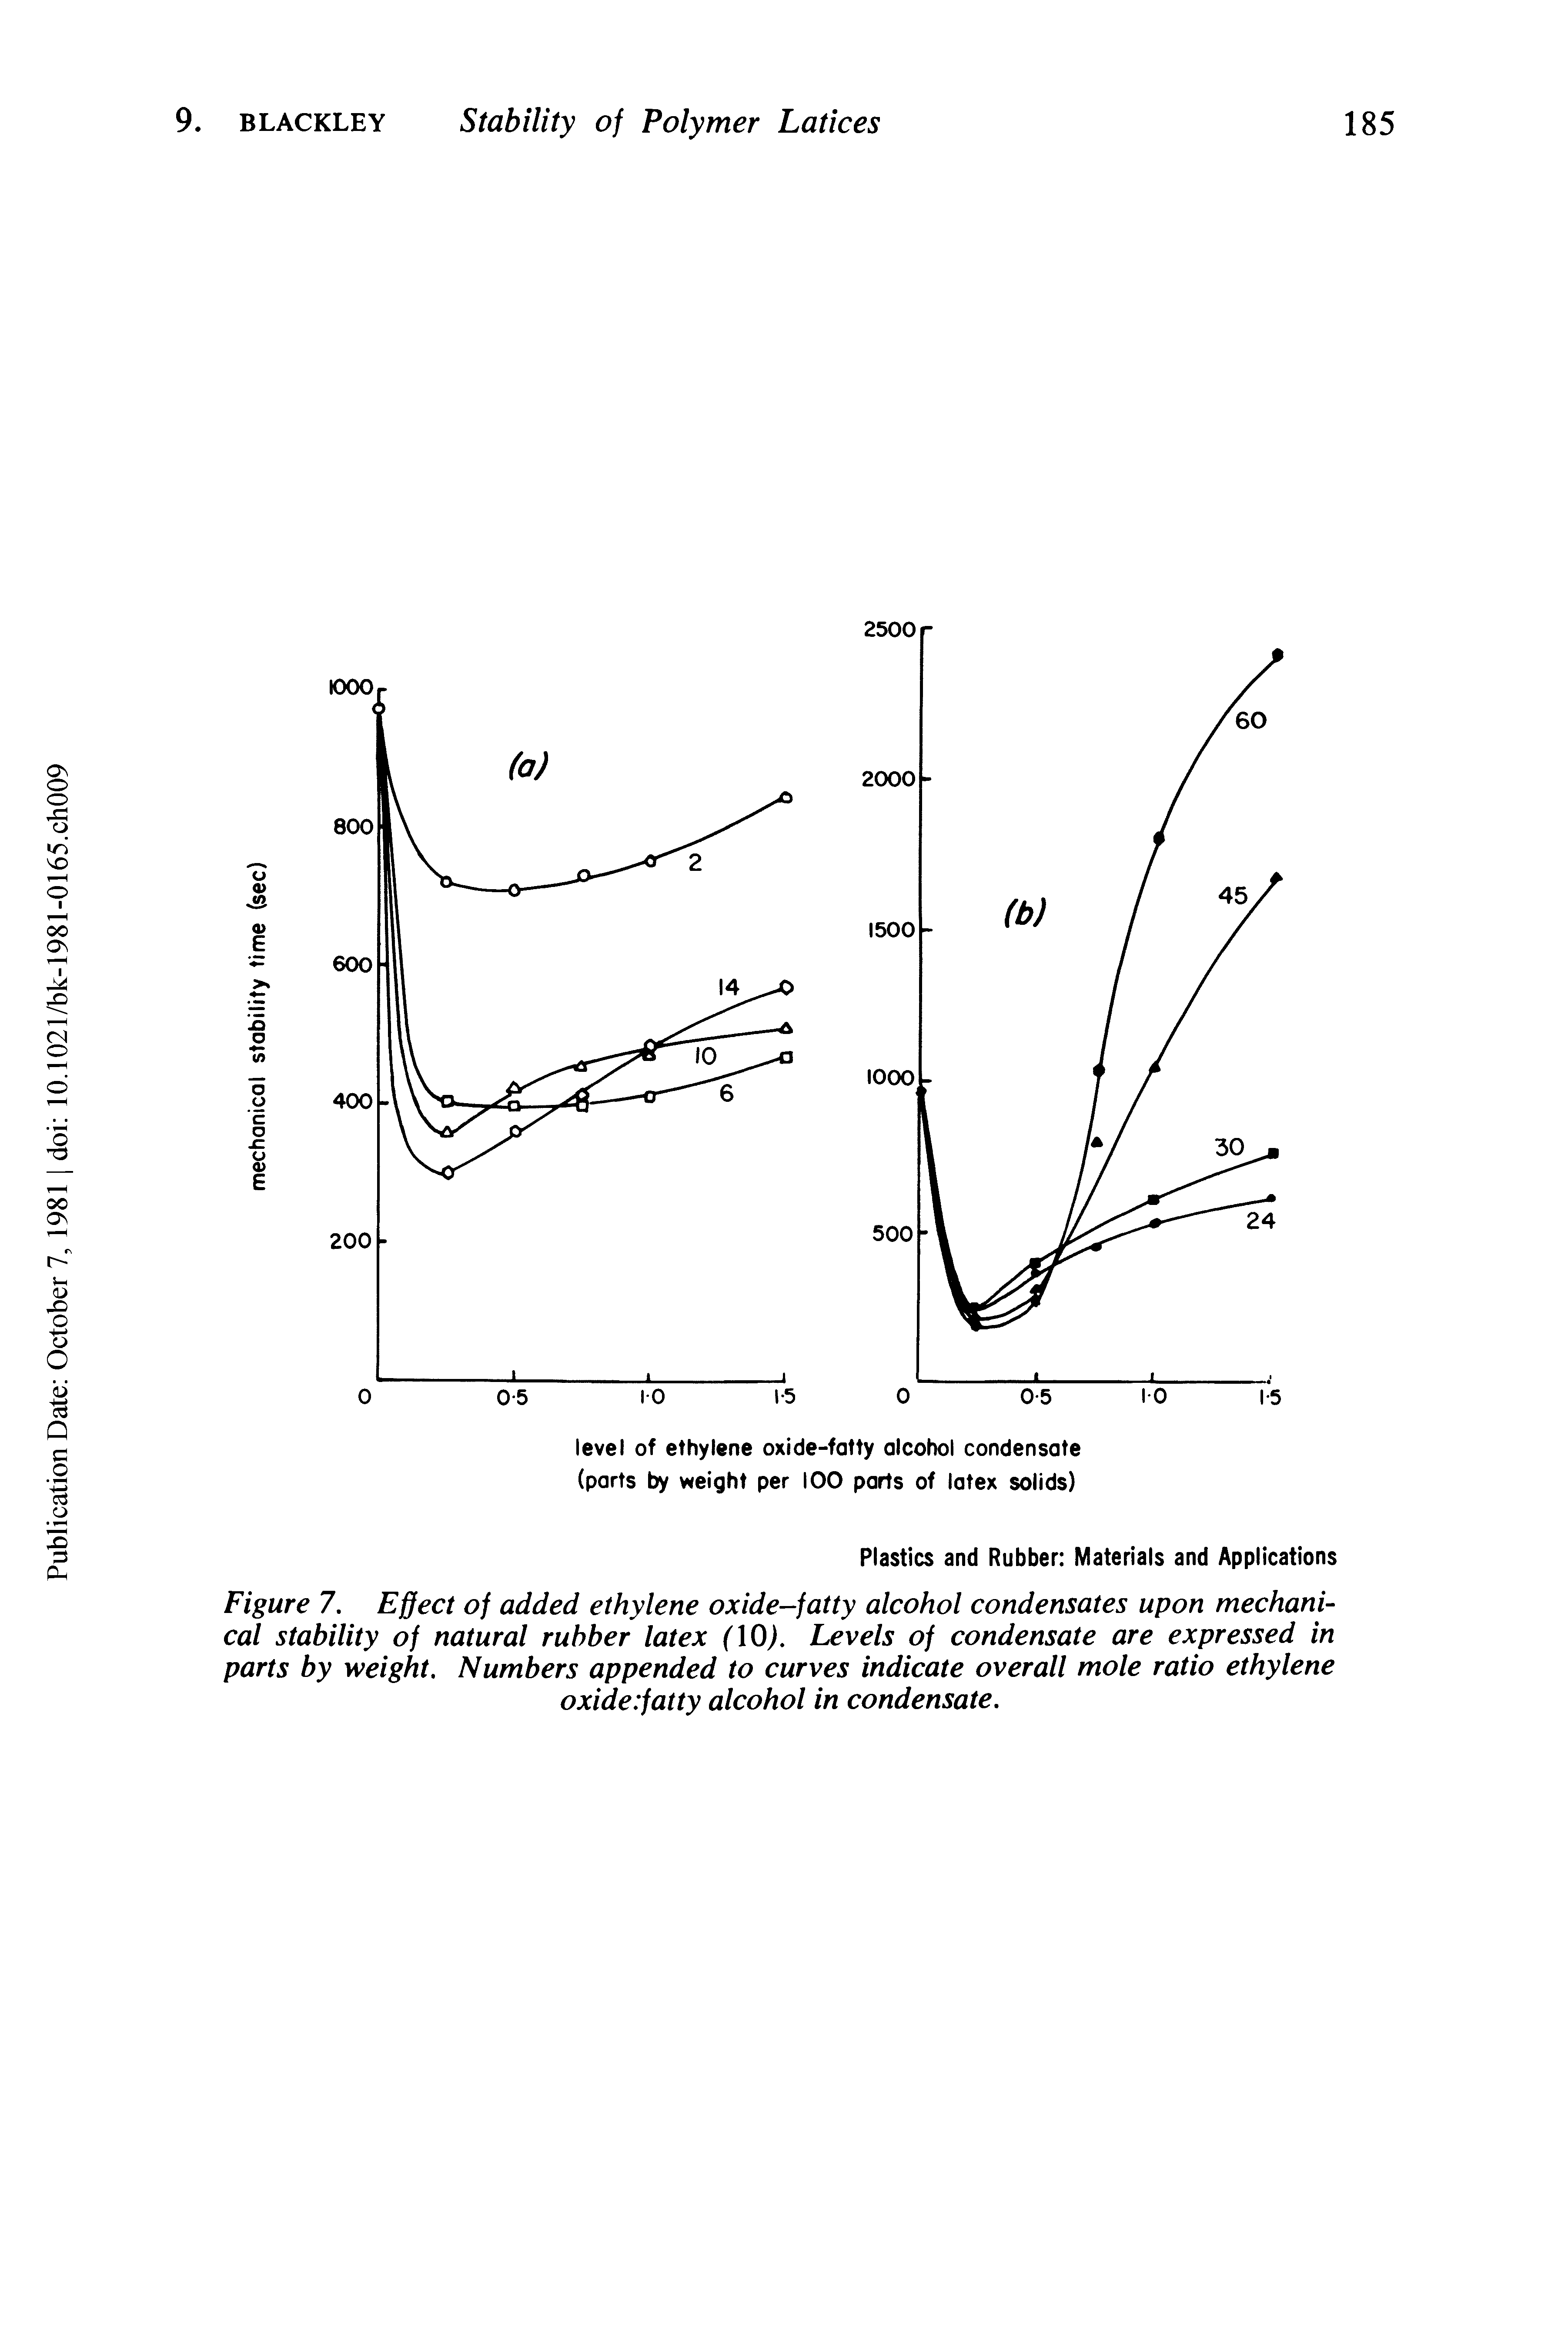 Figure 7. Effect of added ethylene oxide-fatty alcohol condensates upon mechanical stability of natural rubber latex ( 0). Levels of condensate are expressed in parts by weight. Numbers appended to curves indicate overall mole ratio ethylene oxide fatty alcohol in condensate.